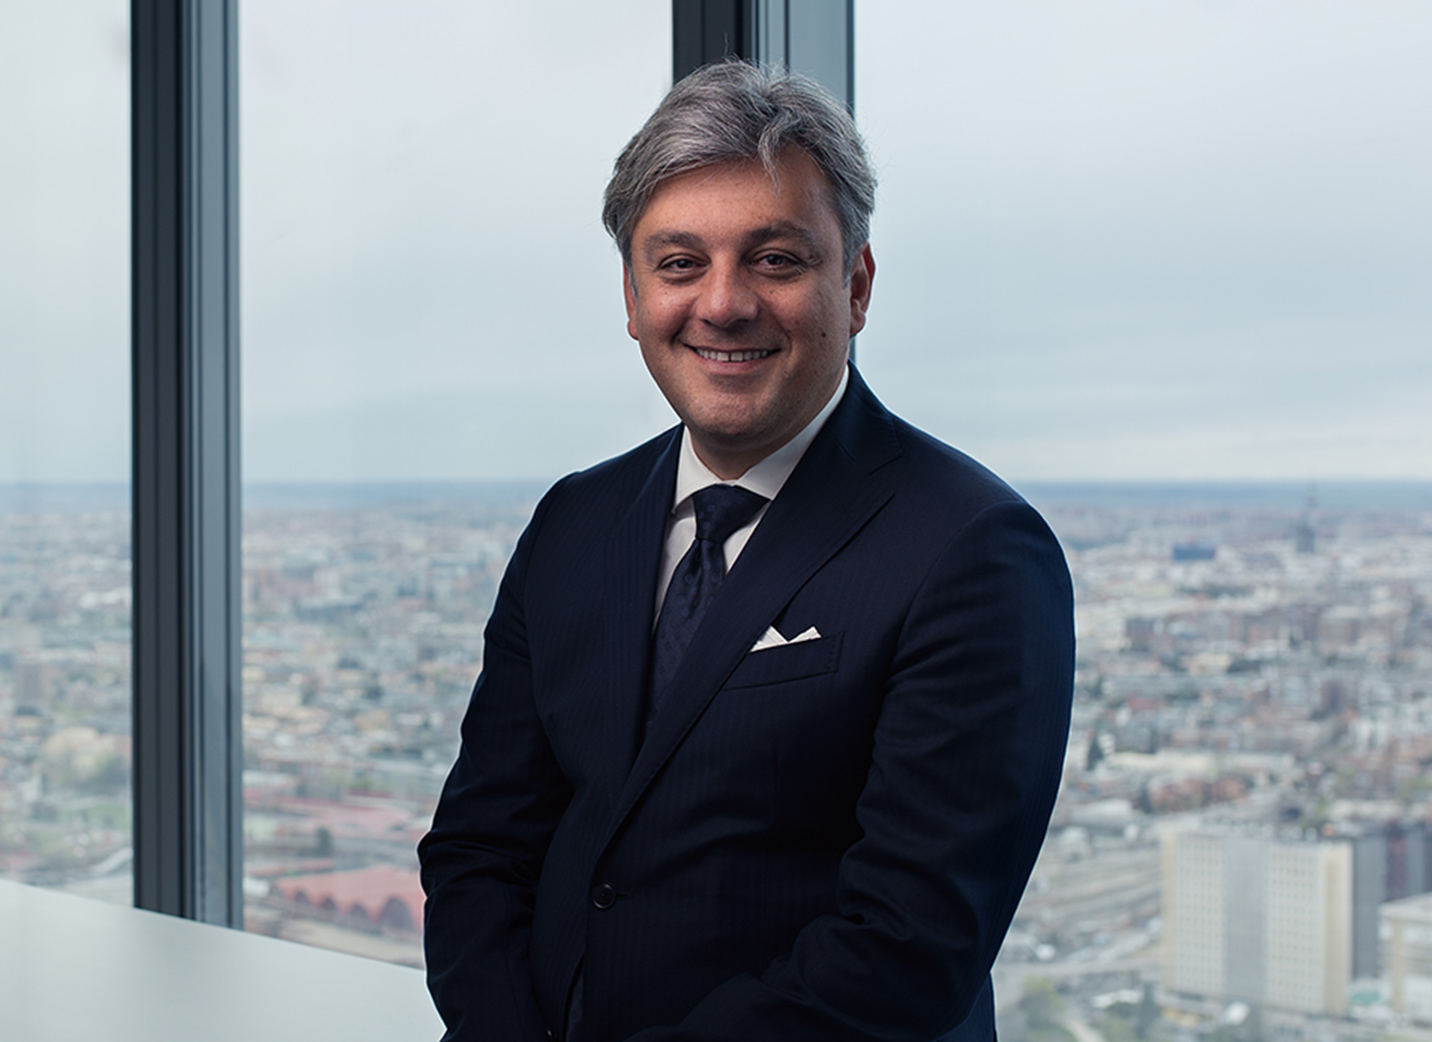 SEAT President Luca de Meo professional headshot with a view of a city in the background